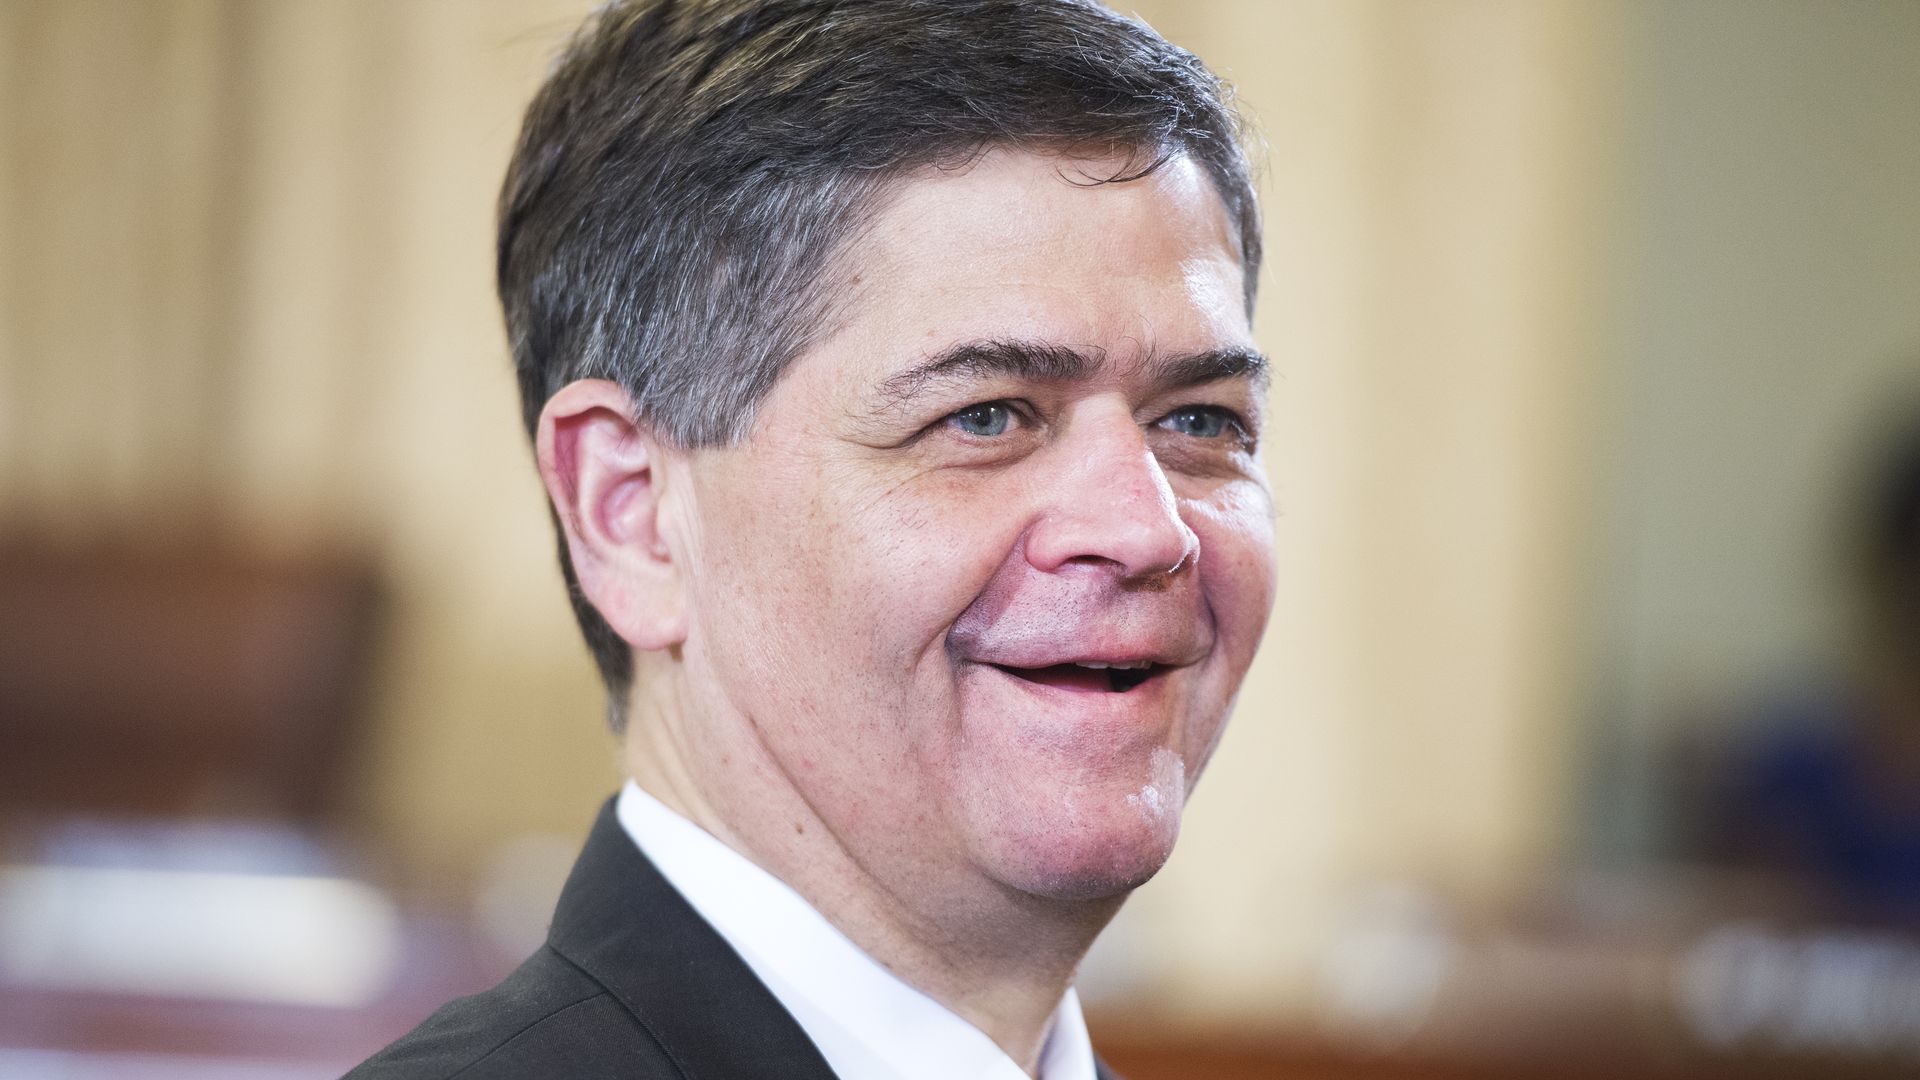 Rep. Filemon Vela, D-Texas, is seen before a House Homeland Security Committee hearing in Cannon Building 